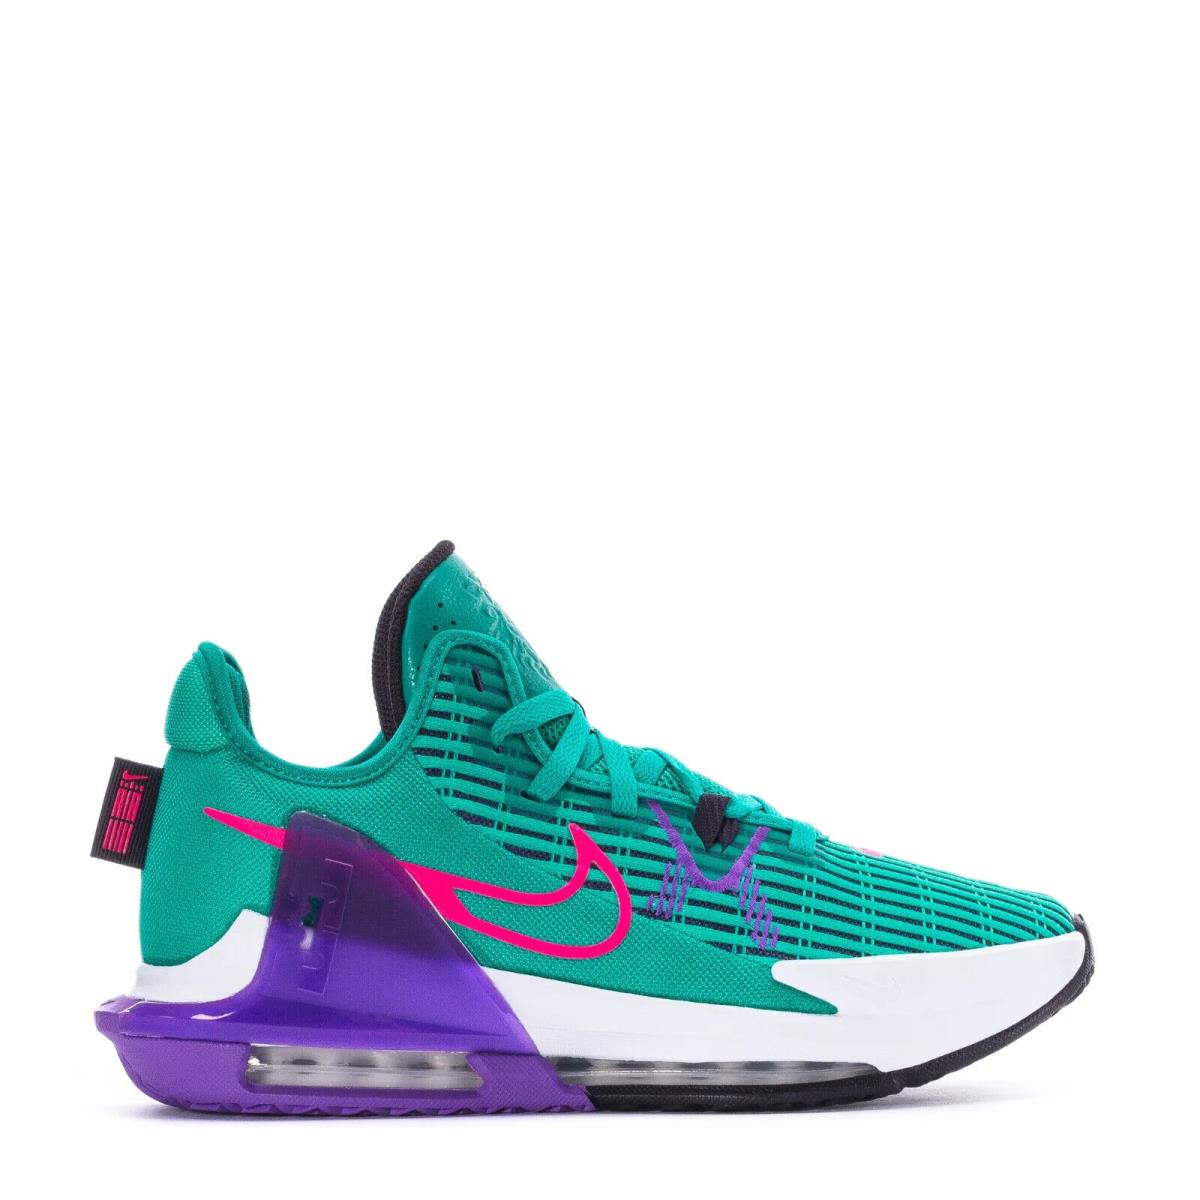 Mens Nike Lebron Witness 6 CZ4052-300 Clear Emerald/hyper Pink/wild Berry Shoes - Green